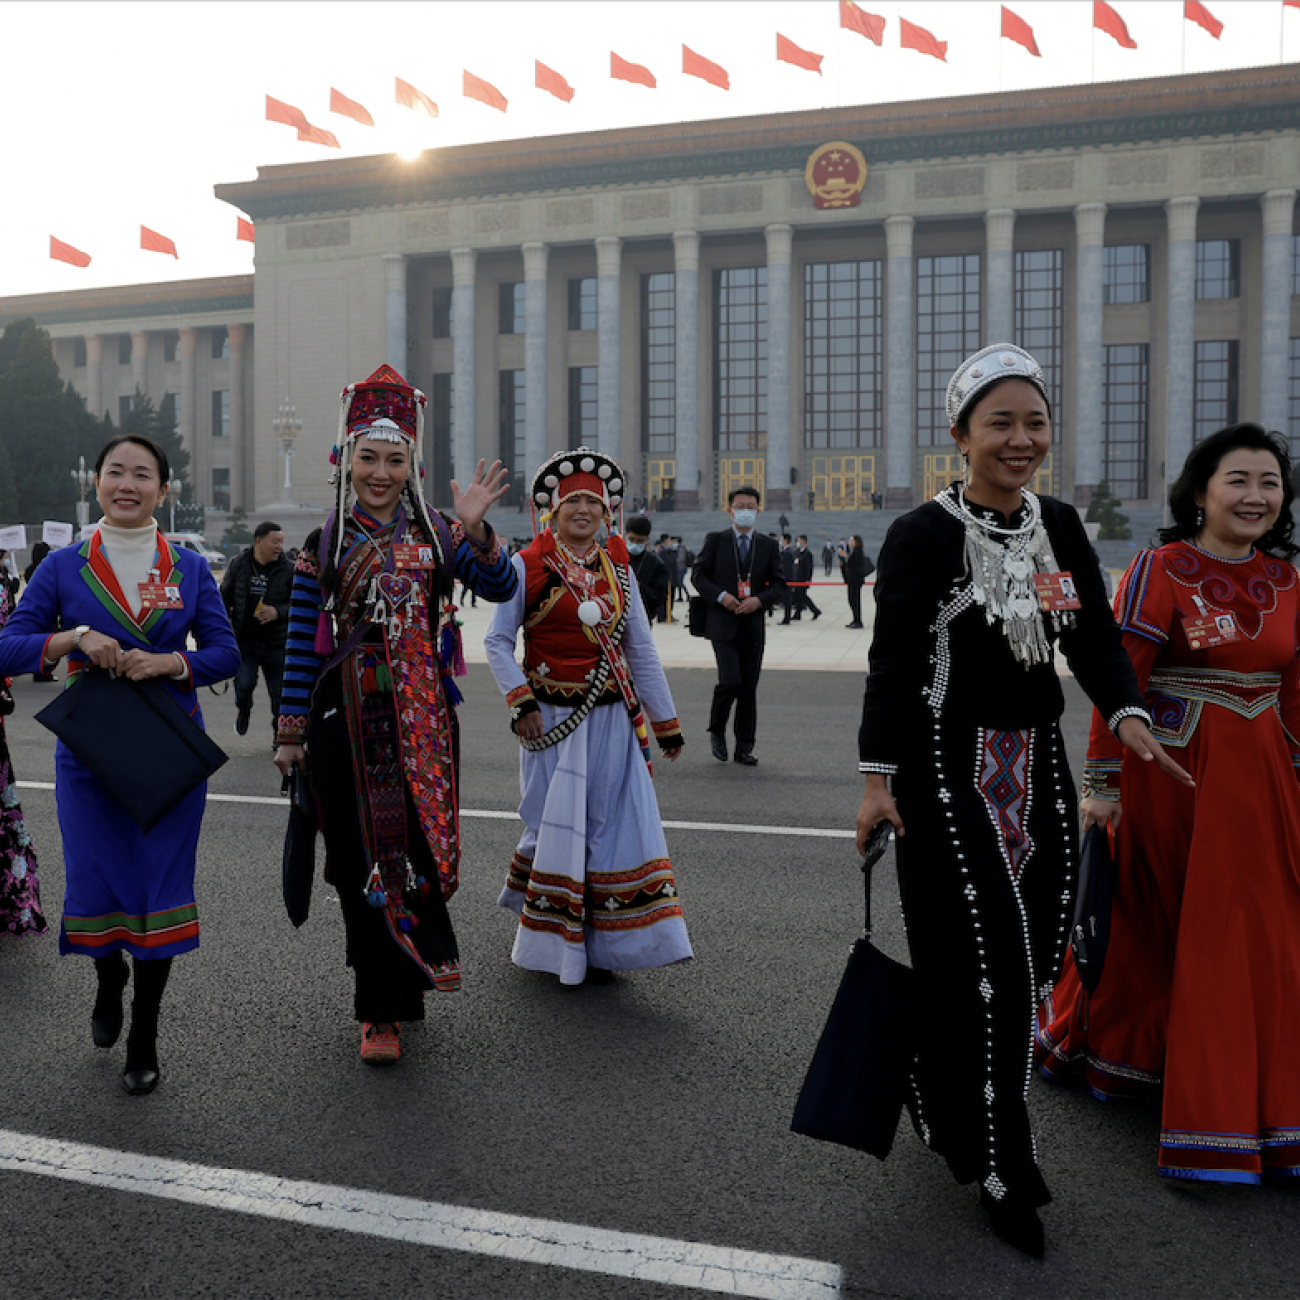 Women delegates in ethnic minority costumes leave the Great Hall of the People following the opening session of the Chinese People's Political Consultative Conference (CPPCC) in Beijing, China March 4, 2023. REUTERS/Thomas Peter